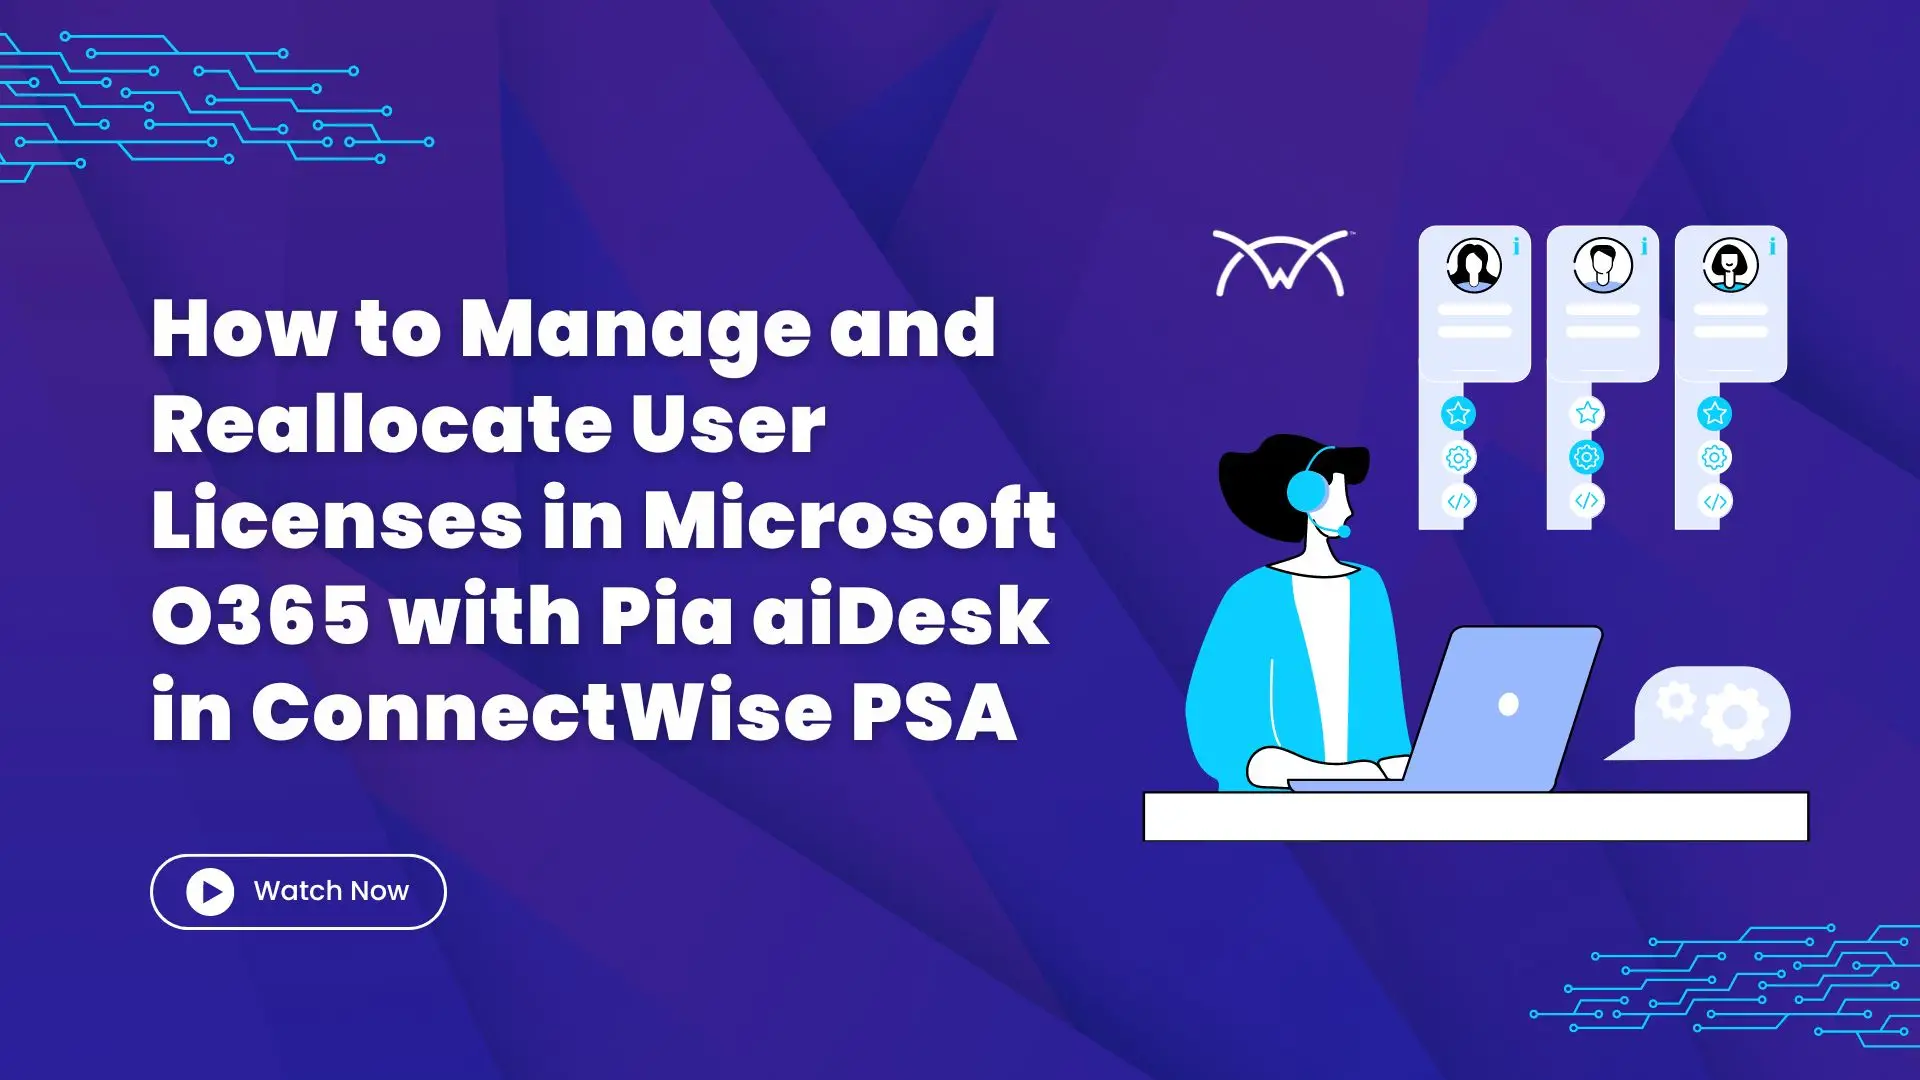 How to Manage and Reallocate User Licenses in Microsoft O365 with Pia aiDesk in ConnectWise PSA